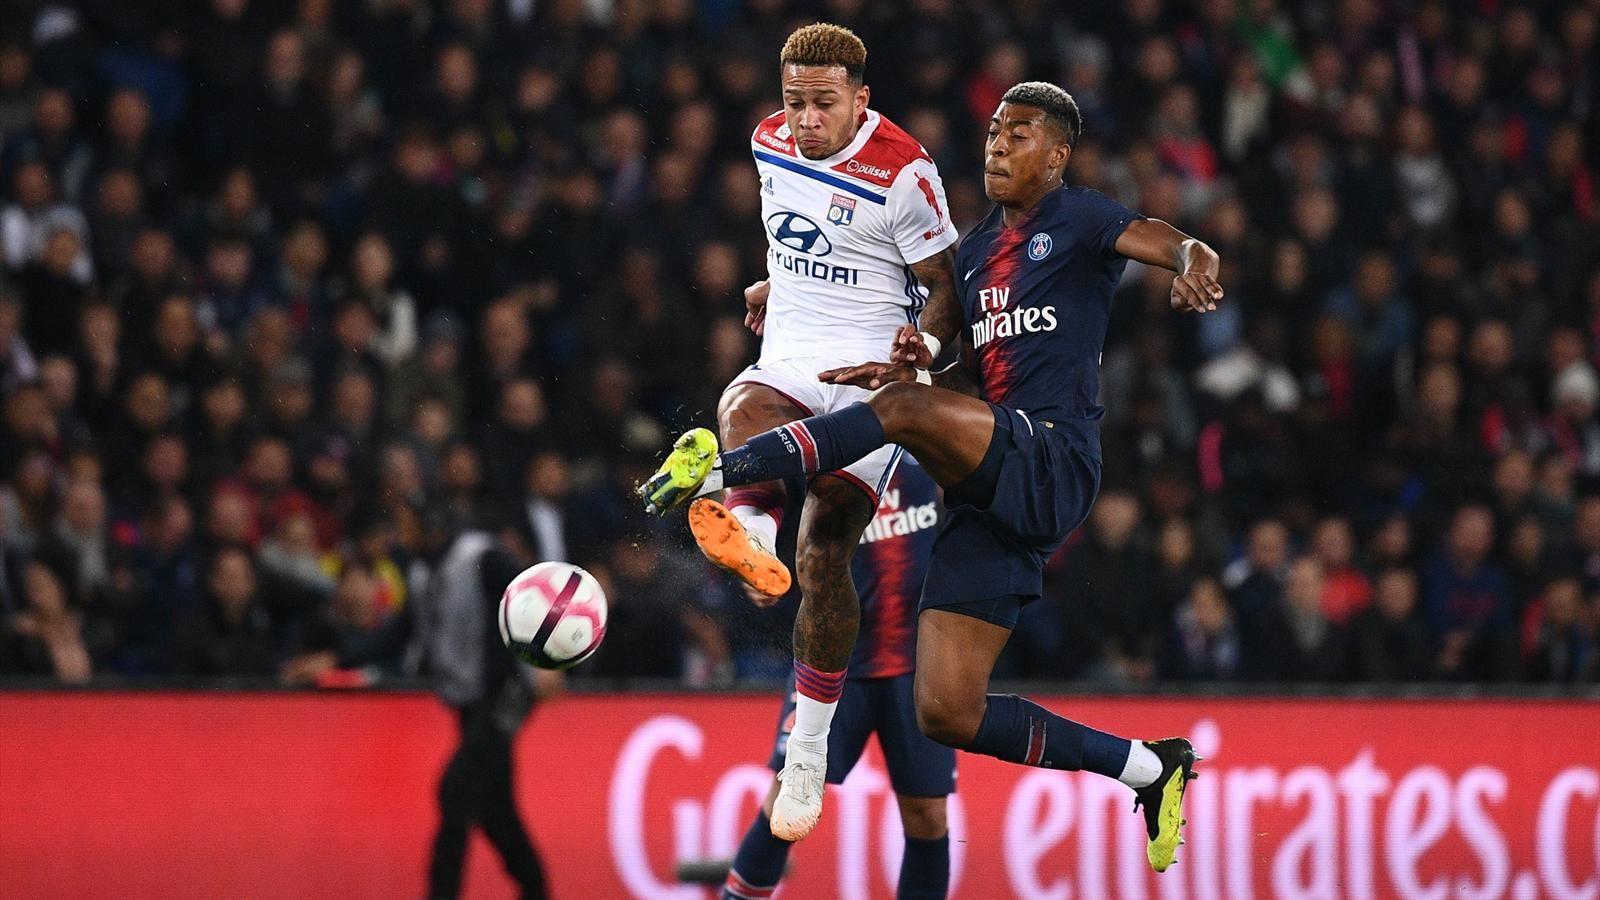 Disciplinary Committee: Three games suspended, Kimpembe will miss OM